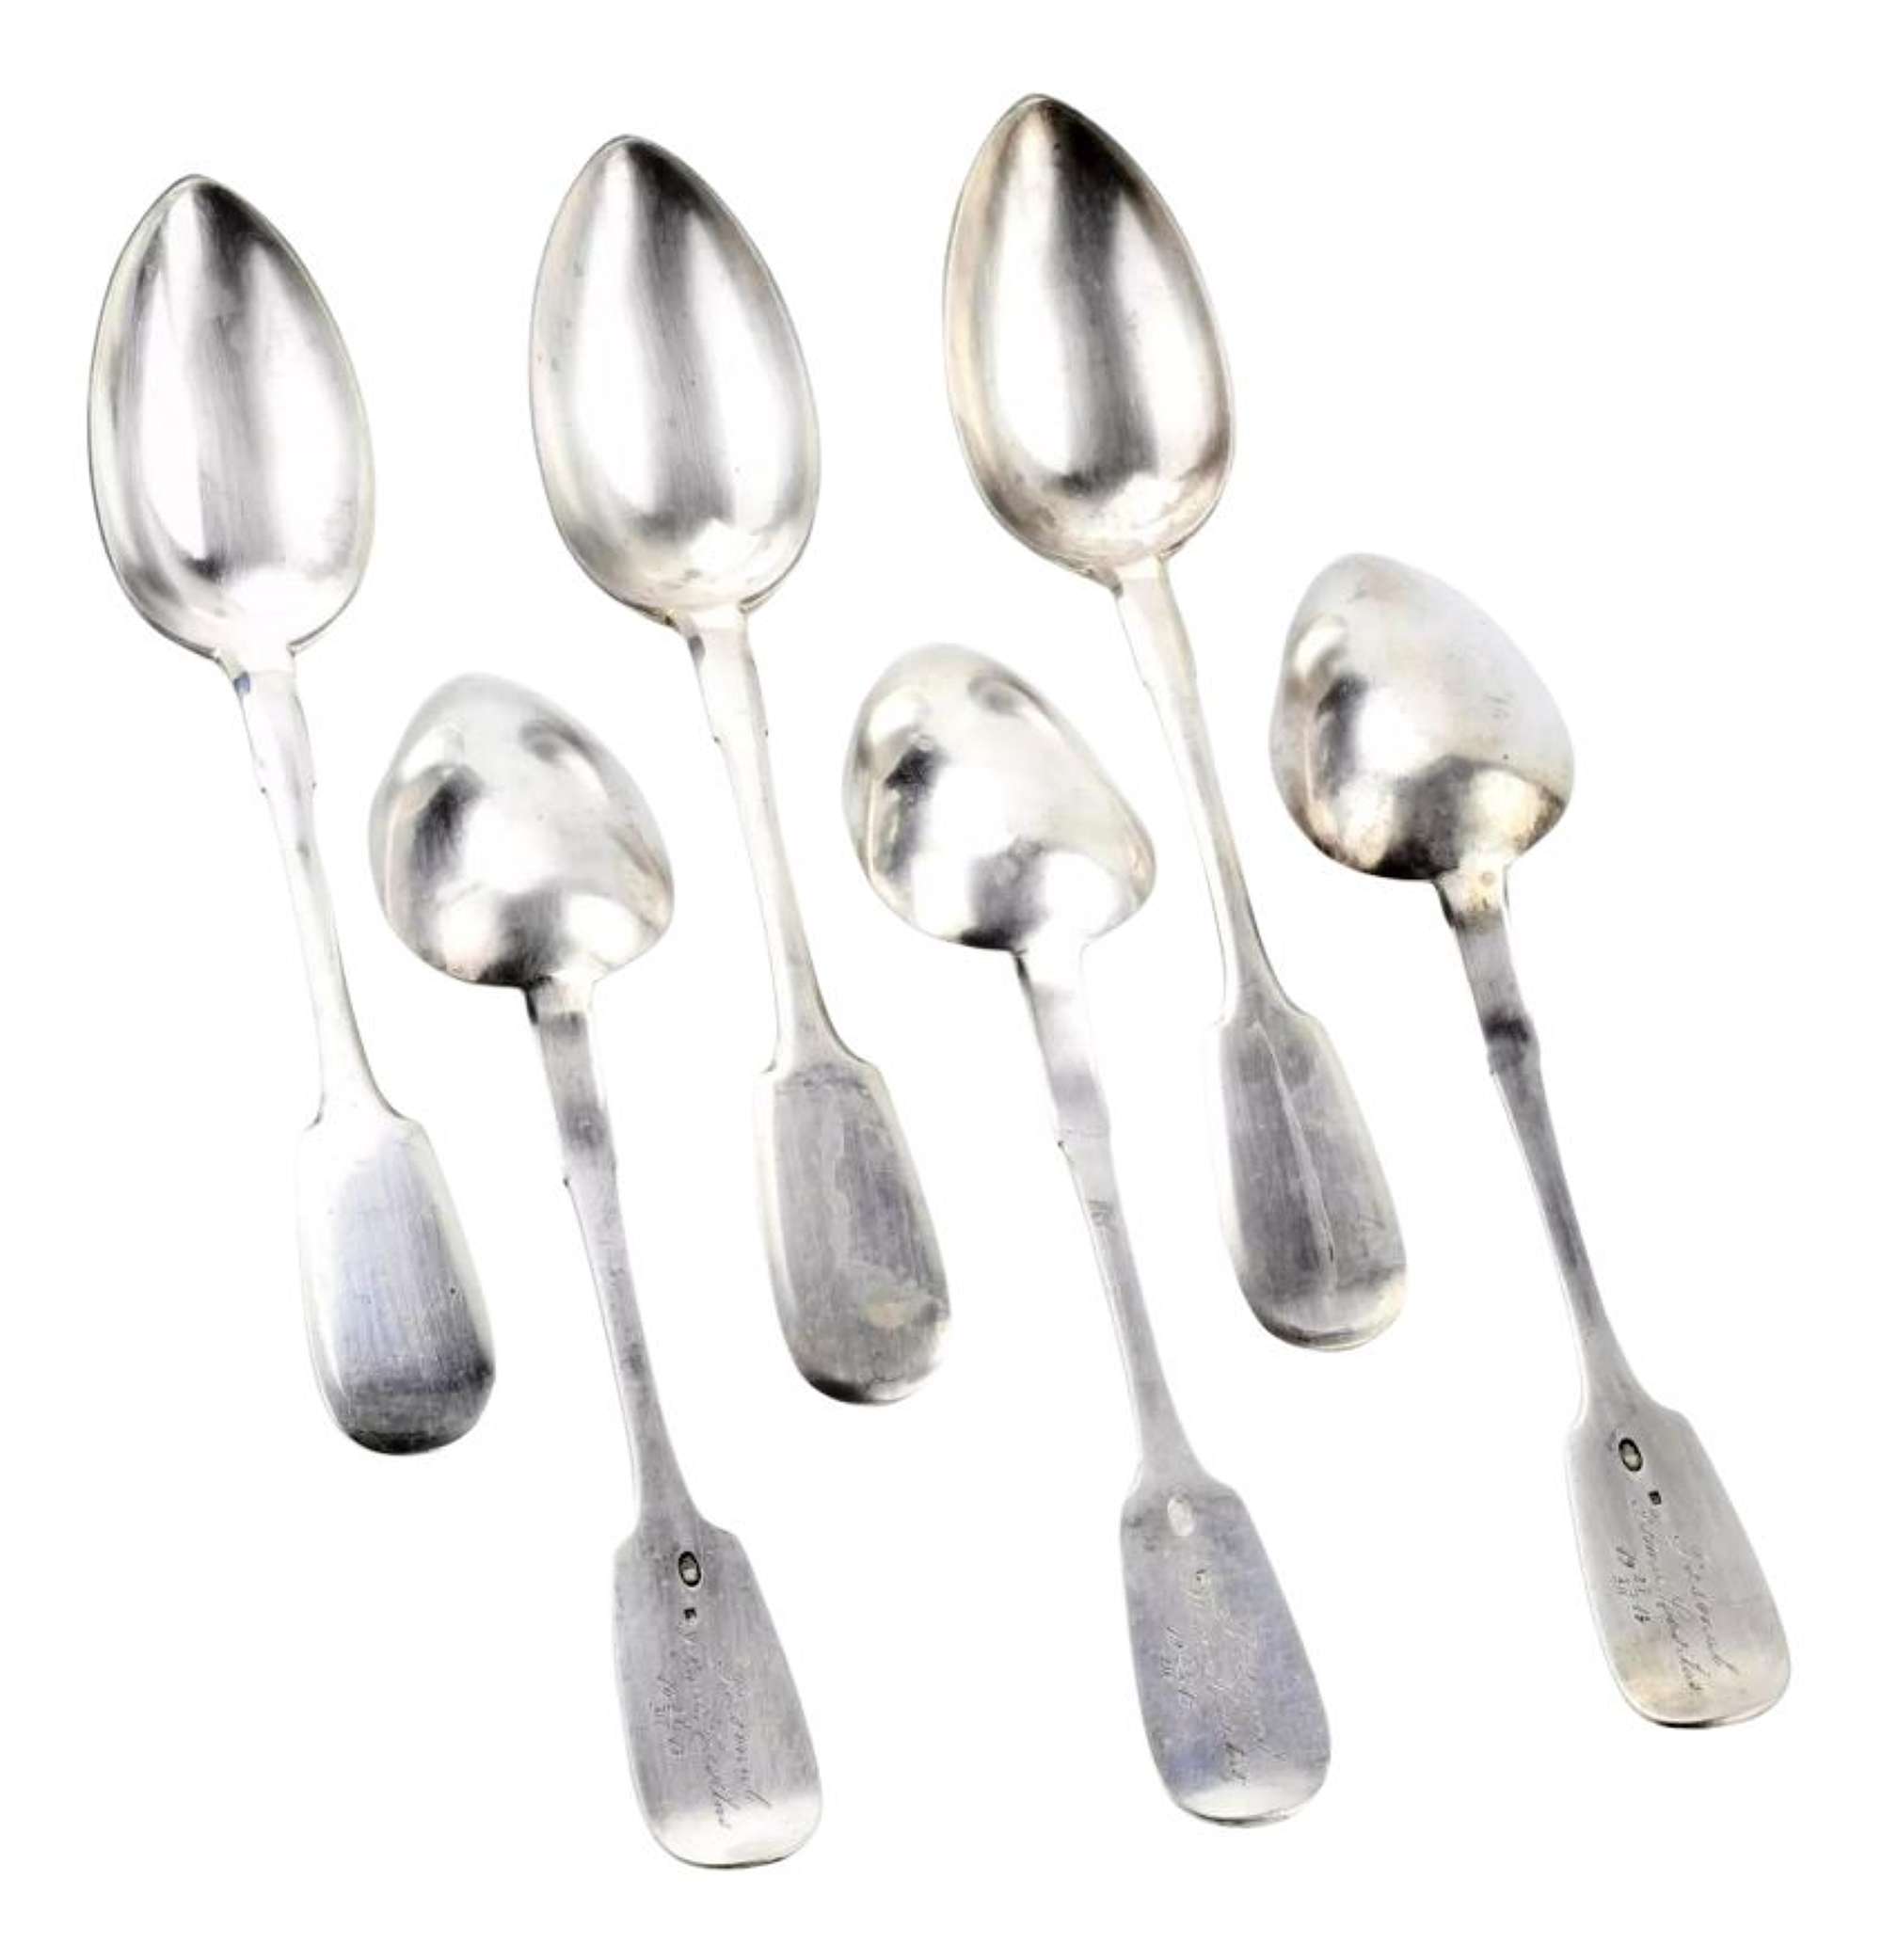 Russian Silver Tablespoons, Set of 6